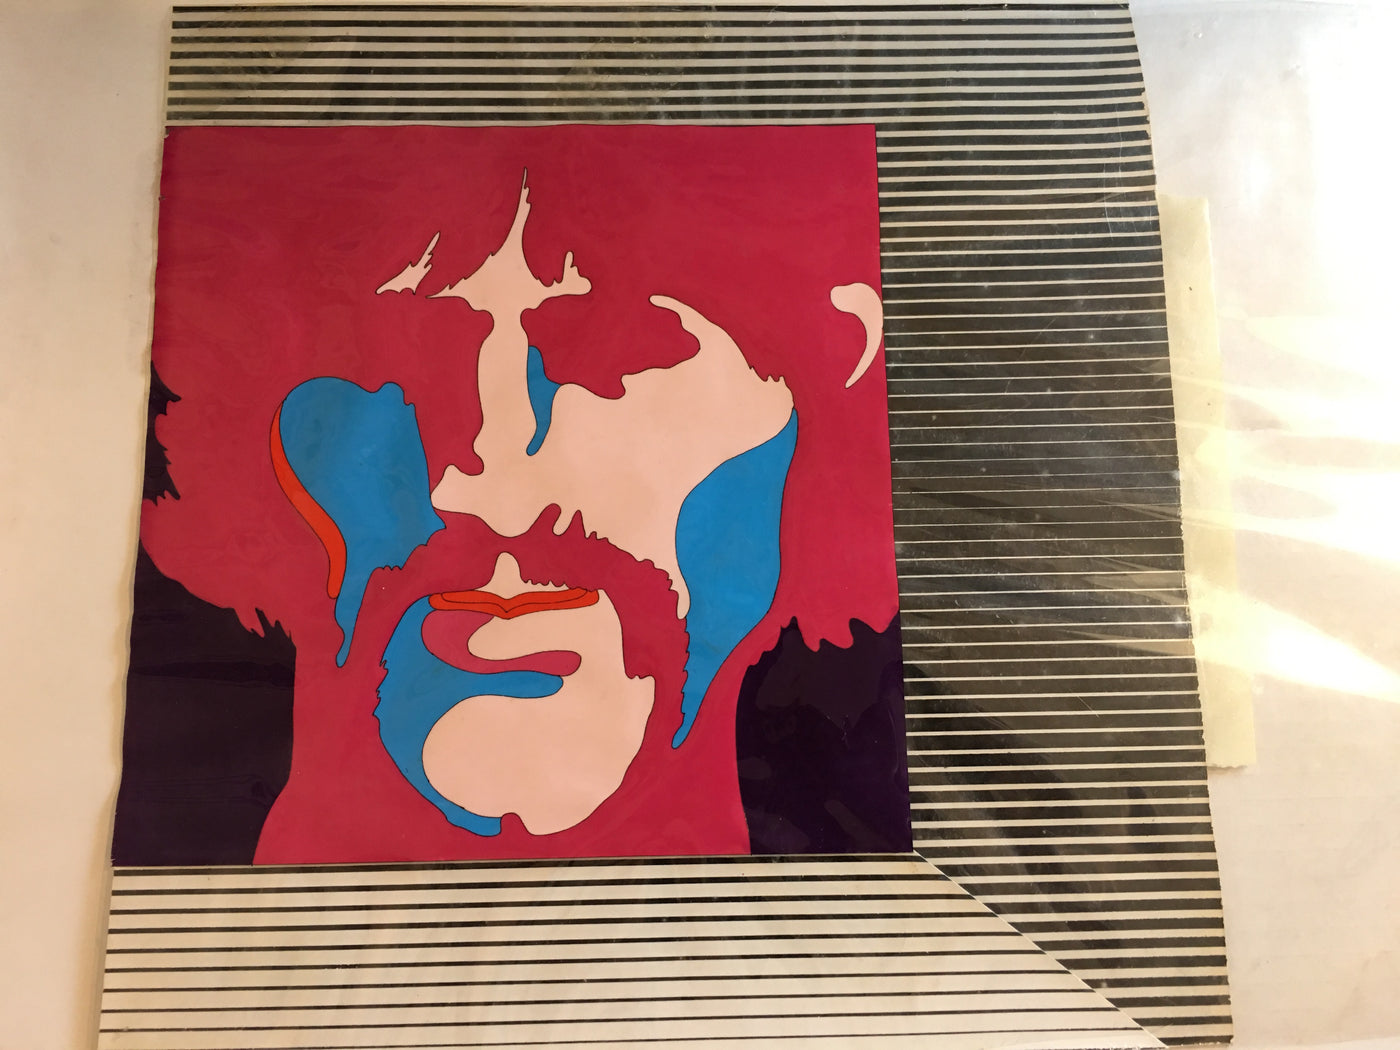 Original Beatles Production Cel From Yellow Submarine featuring George